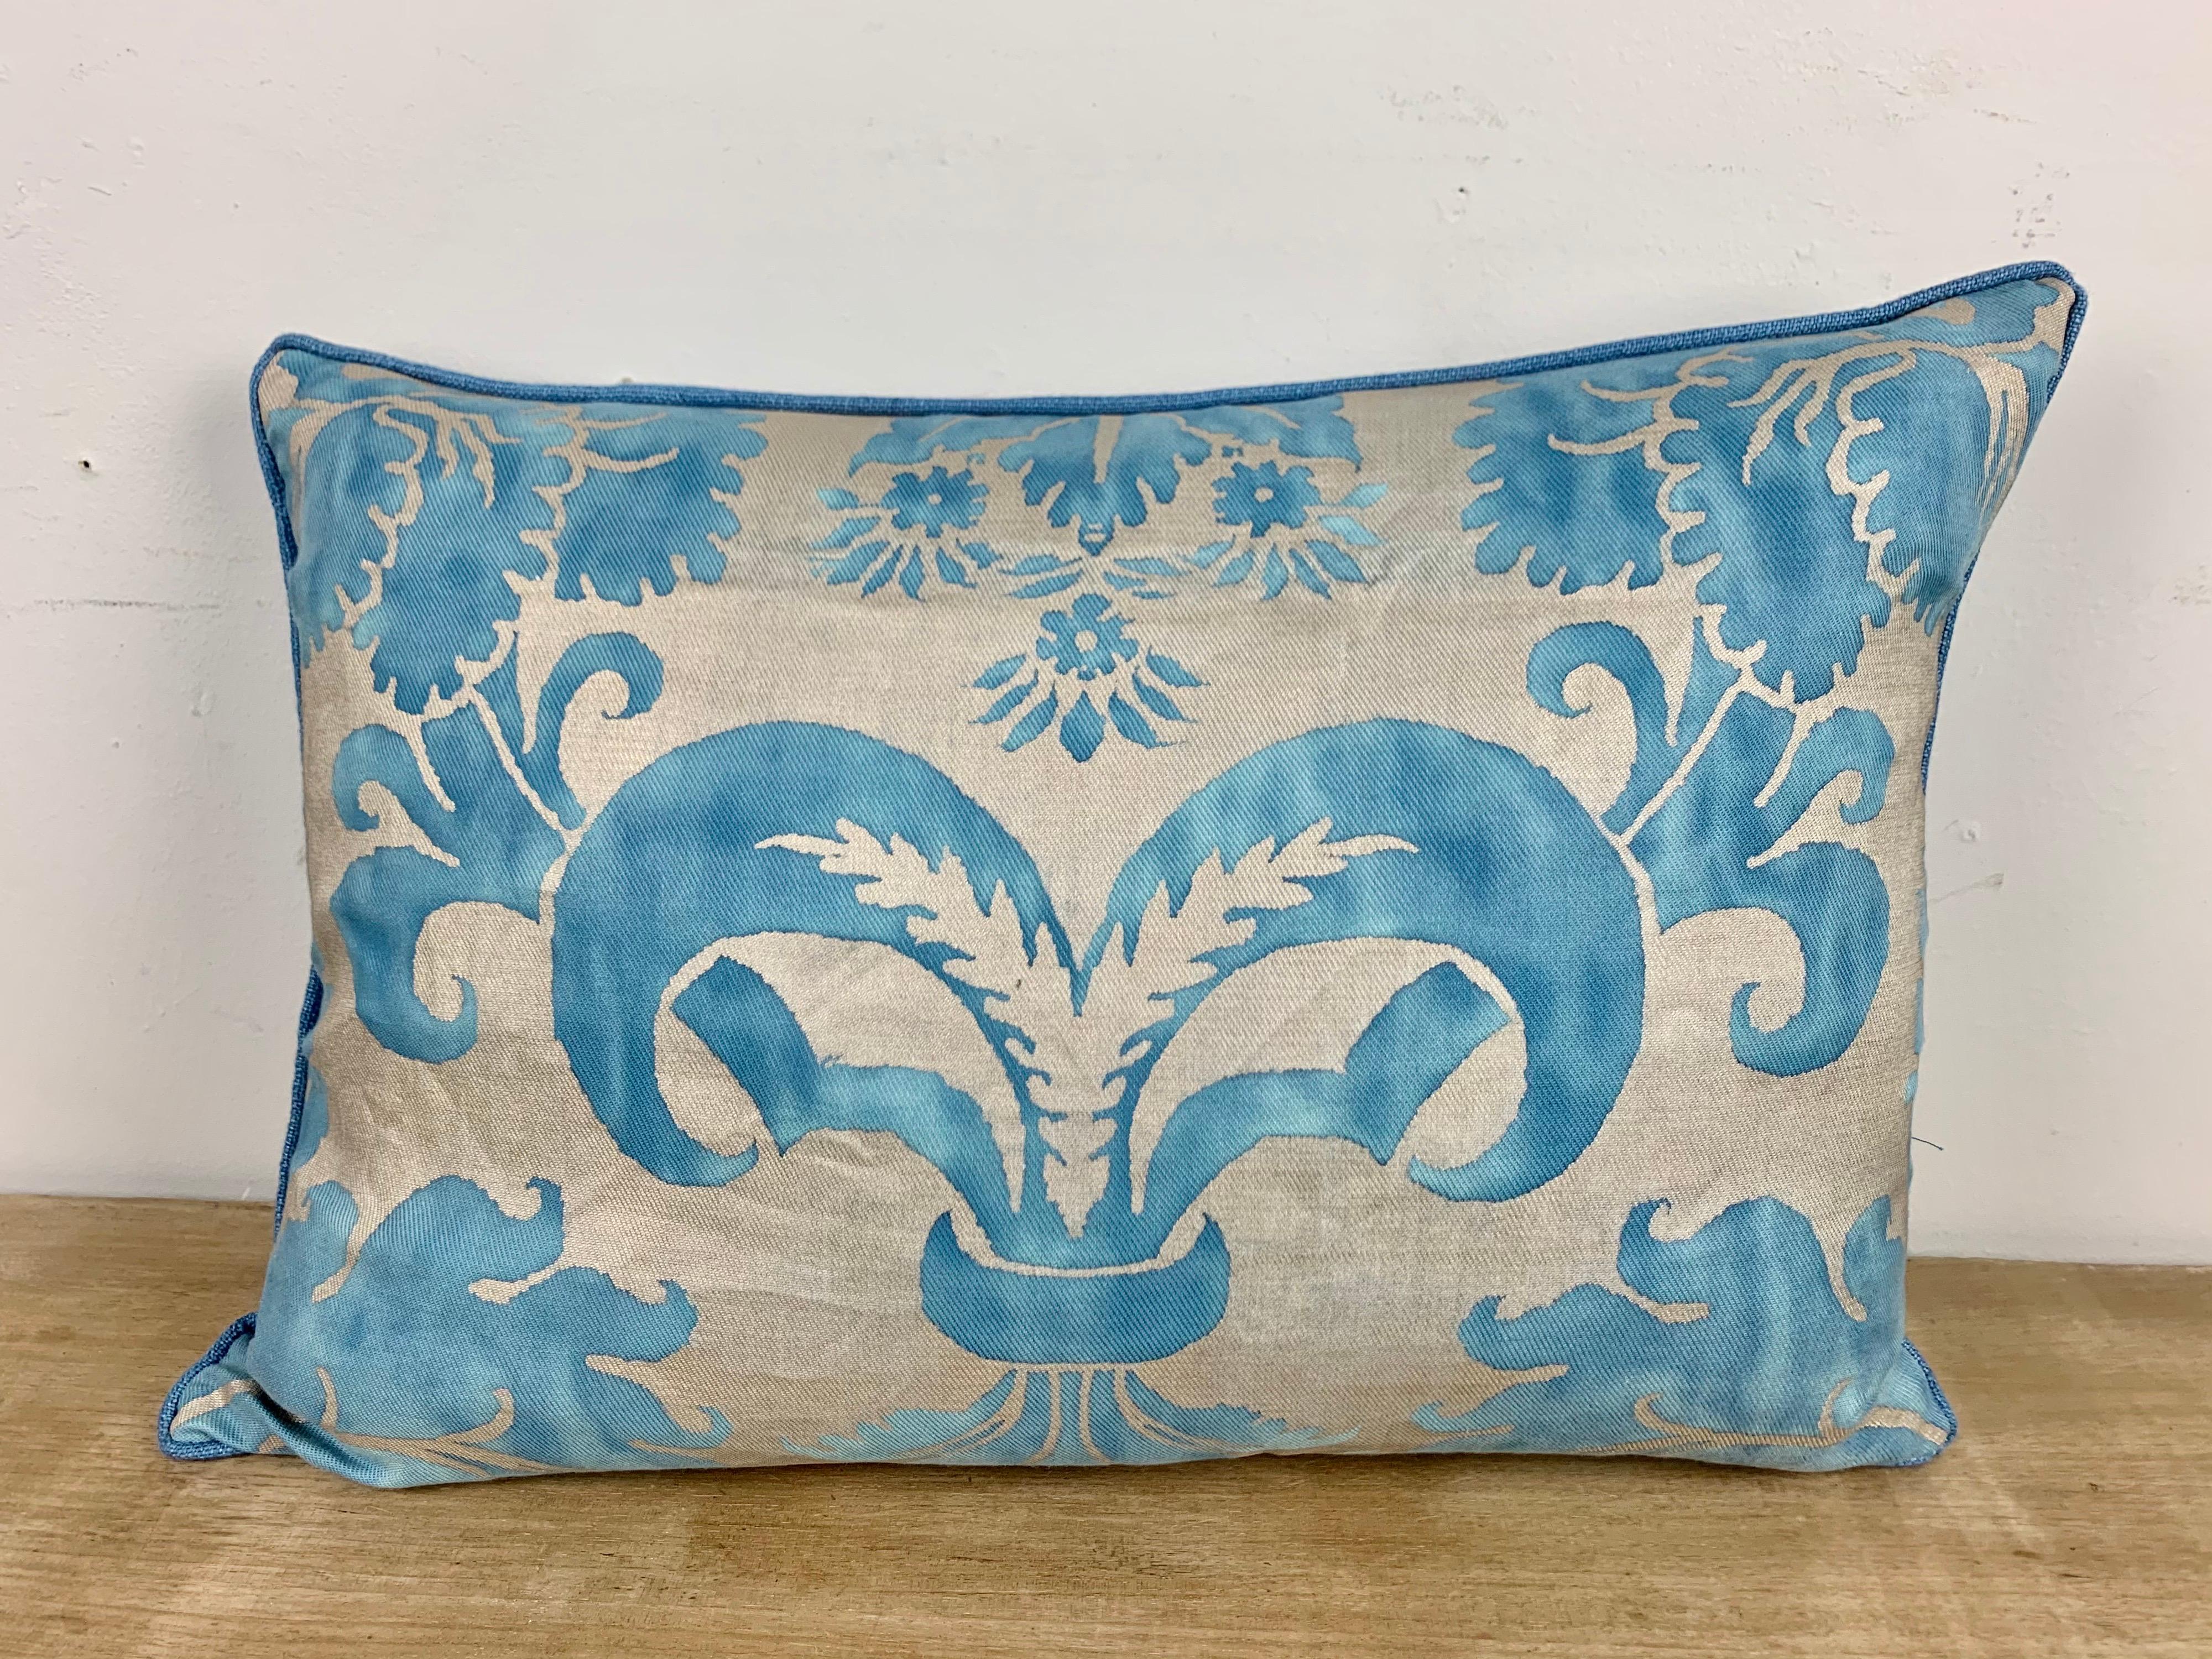 Pair of blue and silver Glicine patterned Fortuny textile pillows with blue linen backs and self cord detail. Down filled inserts, sewn closed.